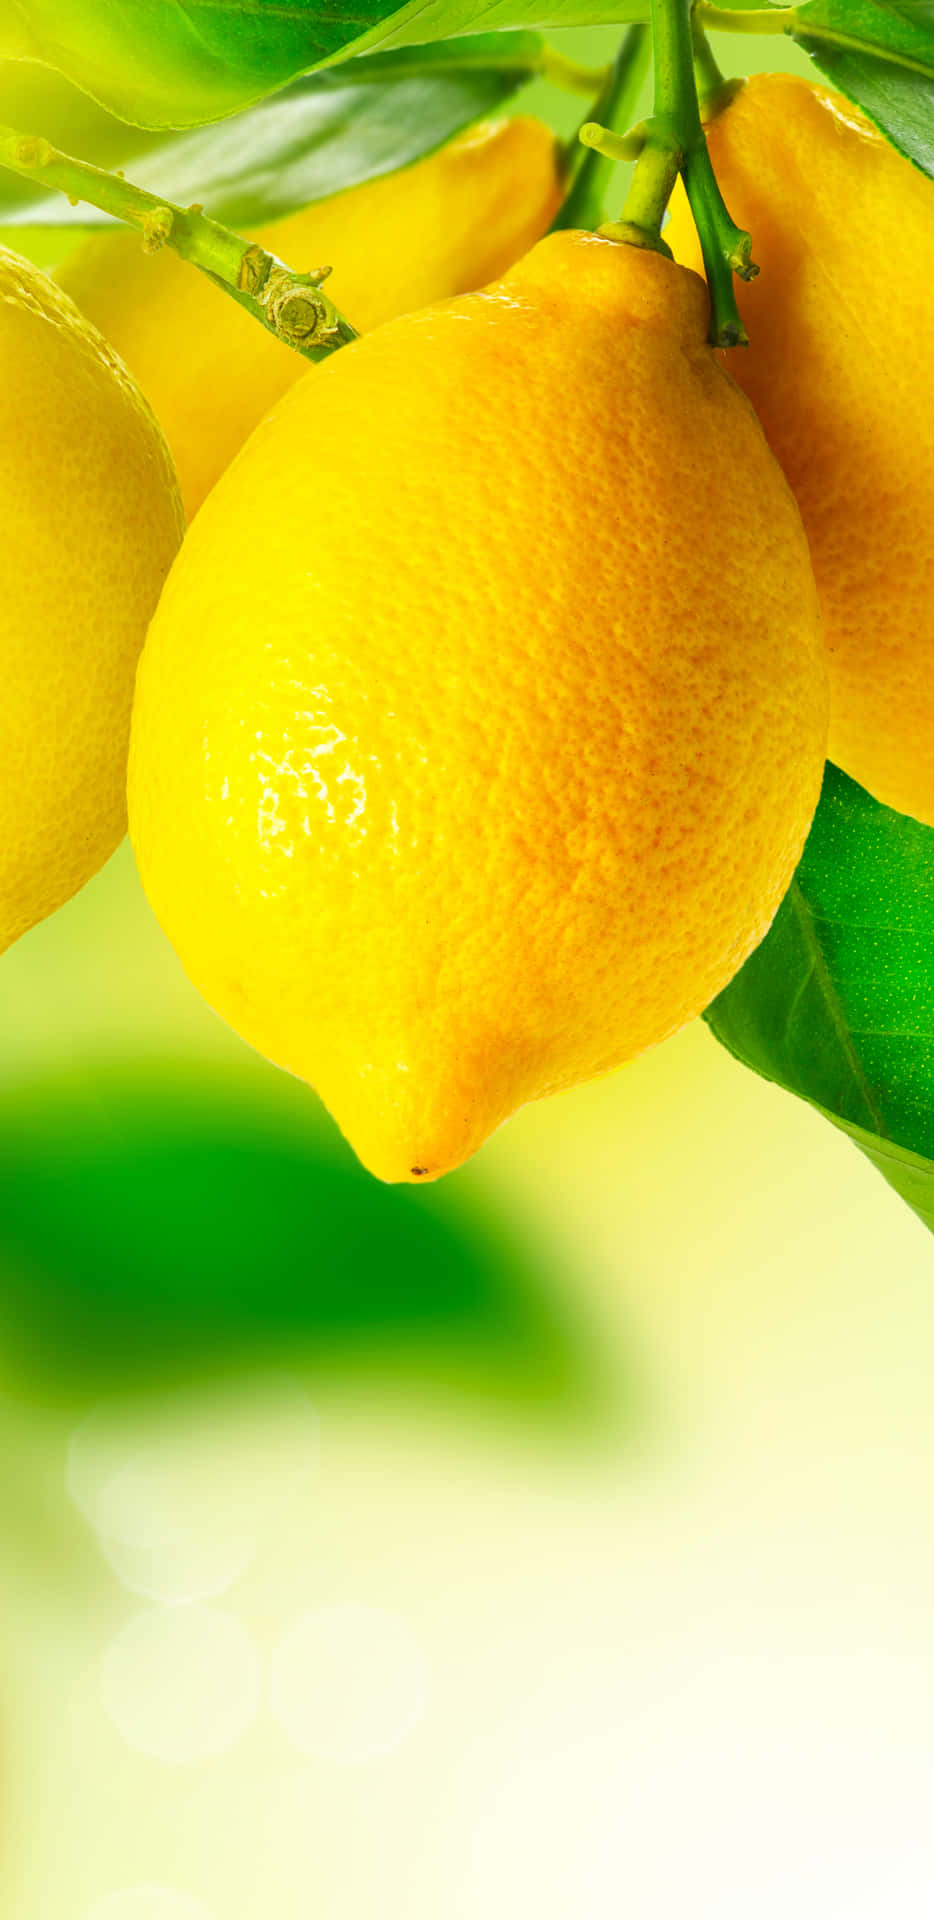 "The Lemon Iphone: Doing More with Less" Wallpaper